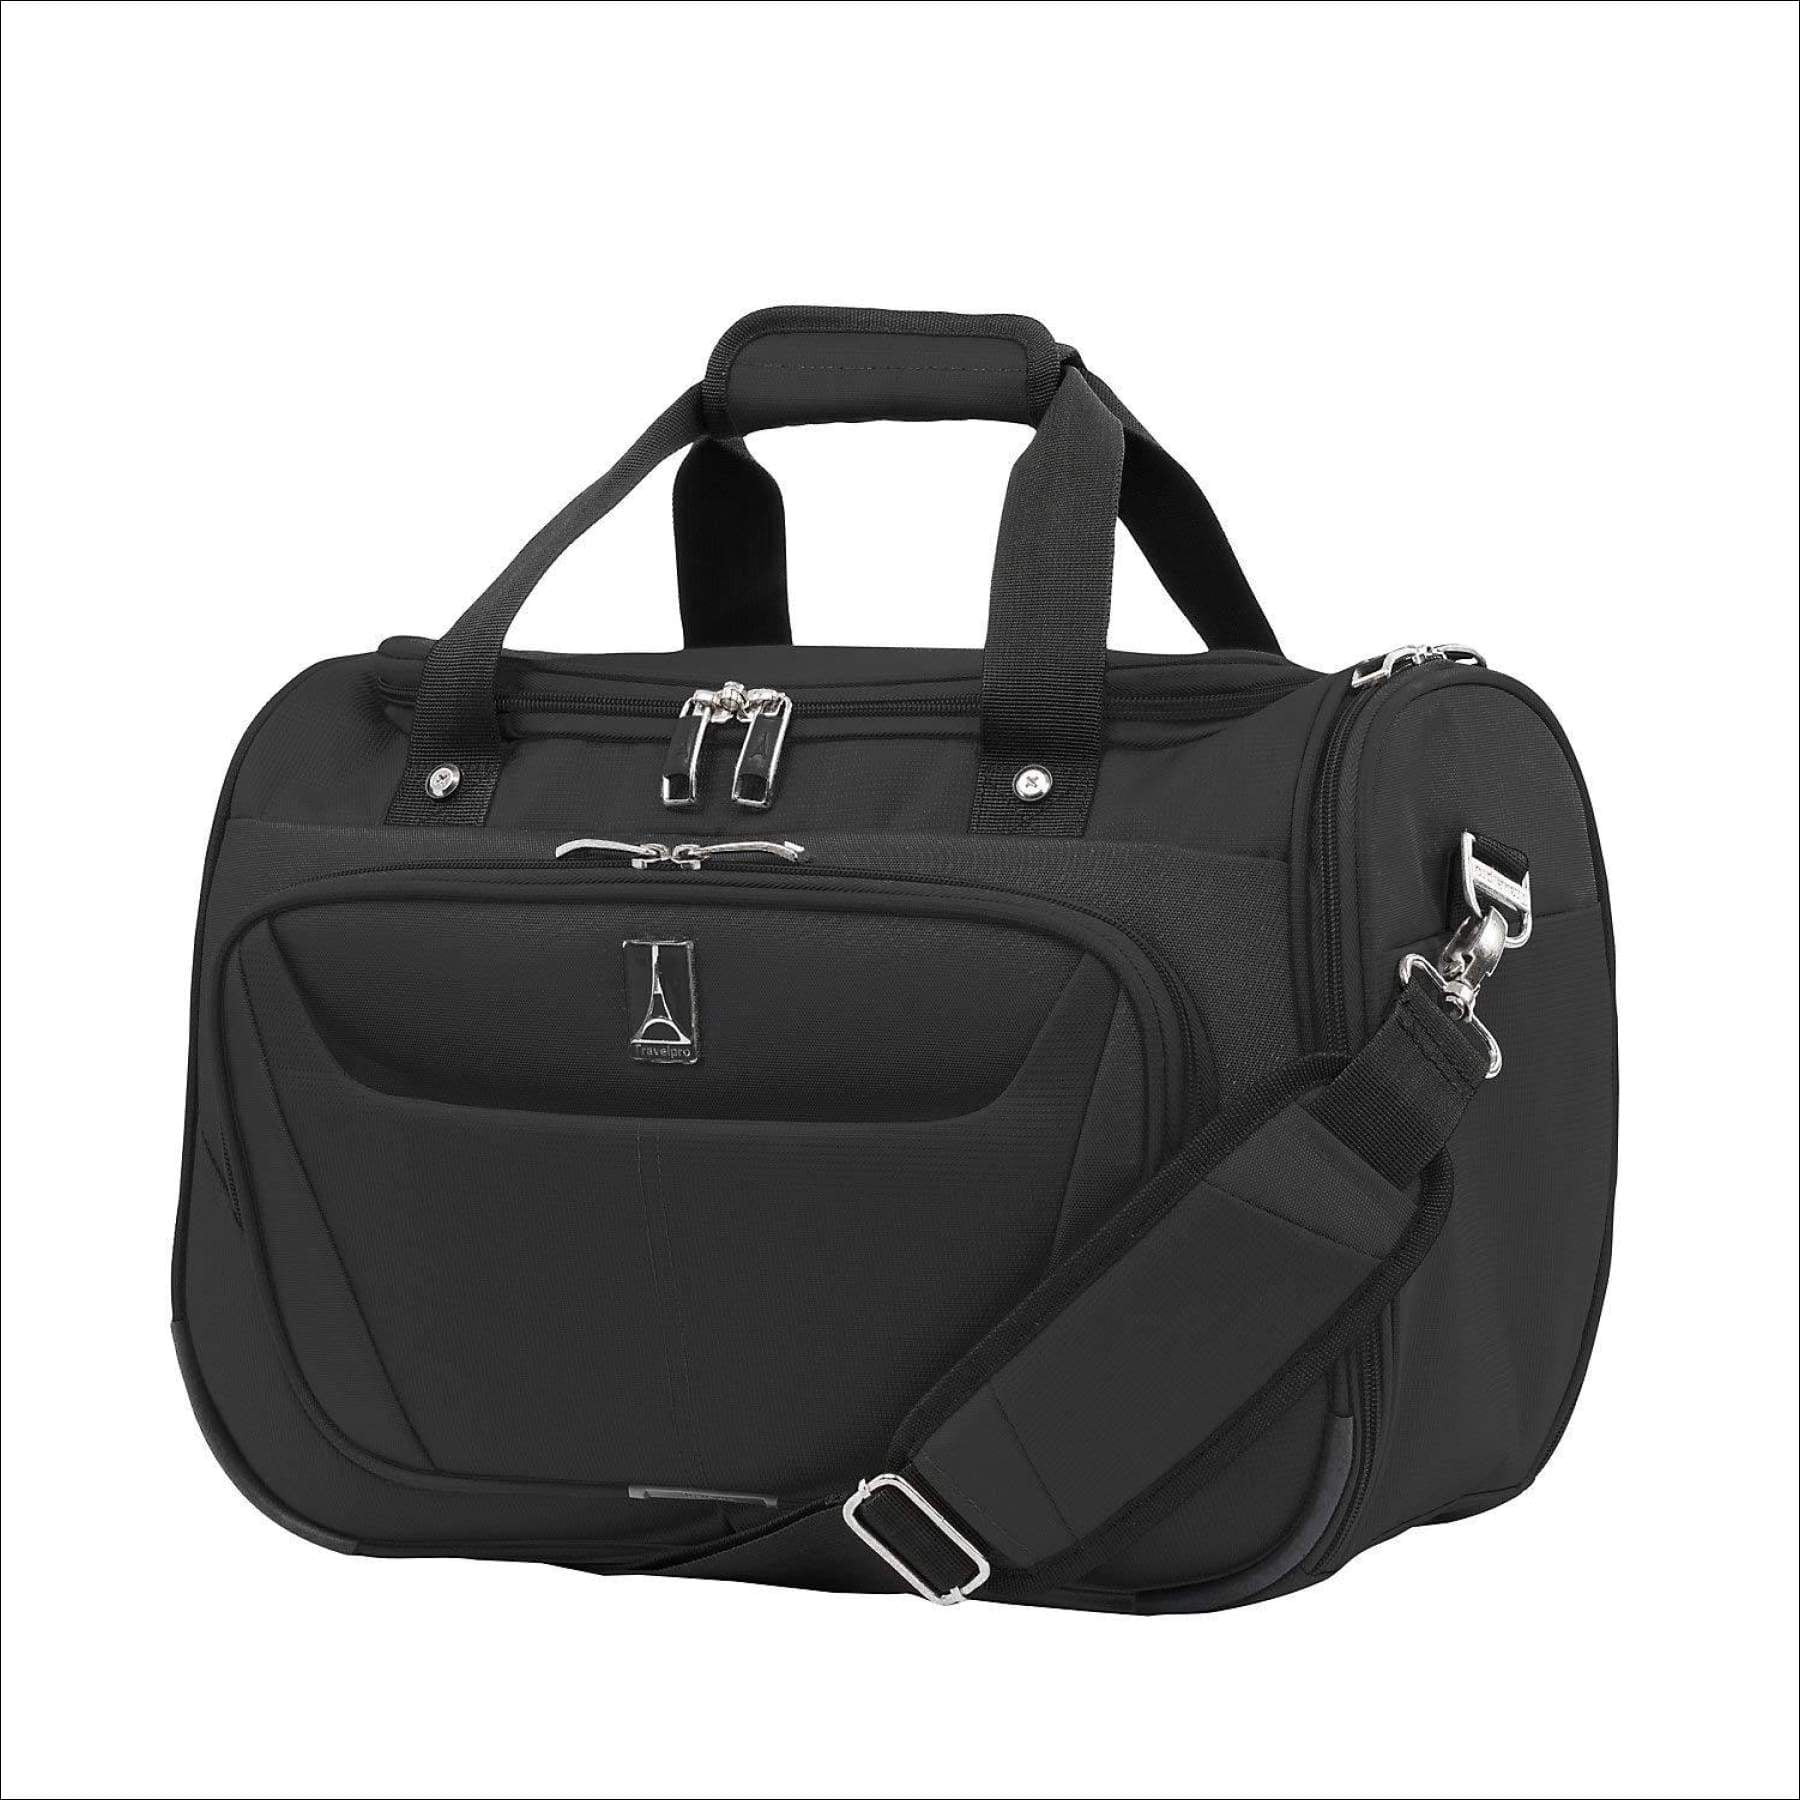 lightweight travel luggage bags